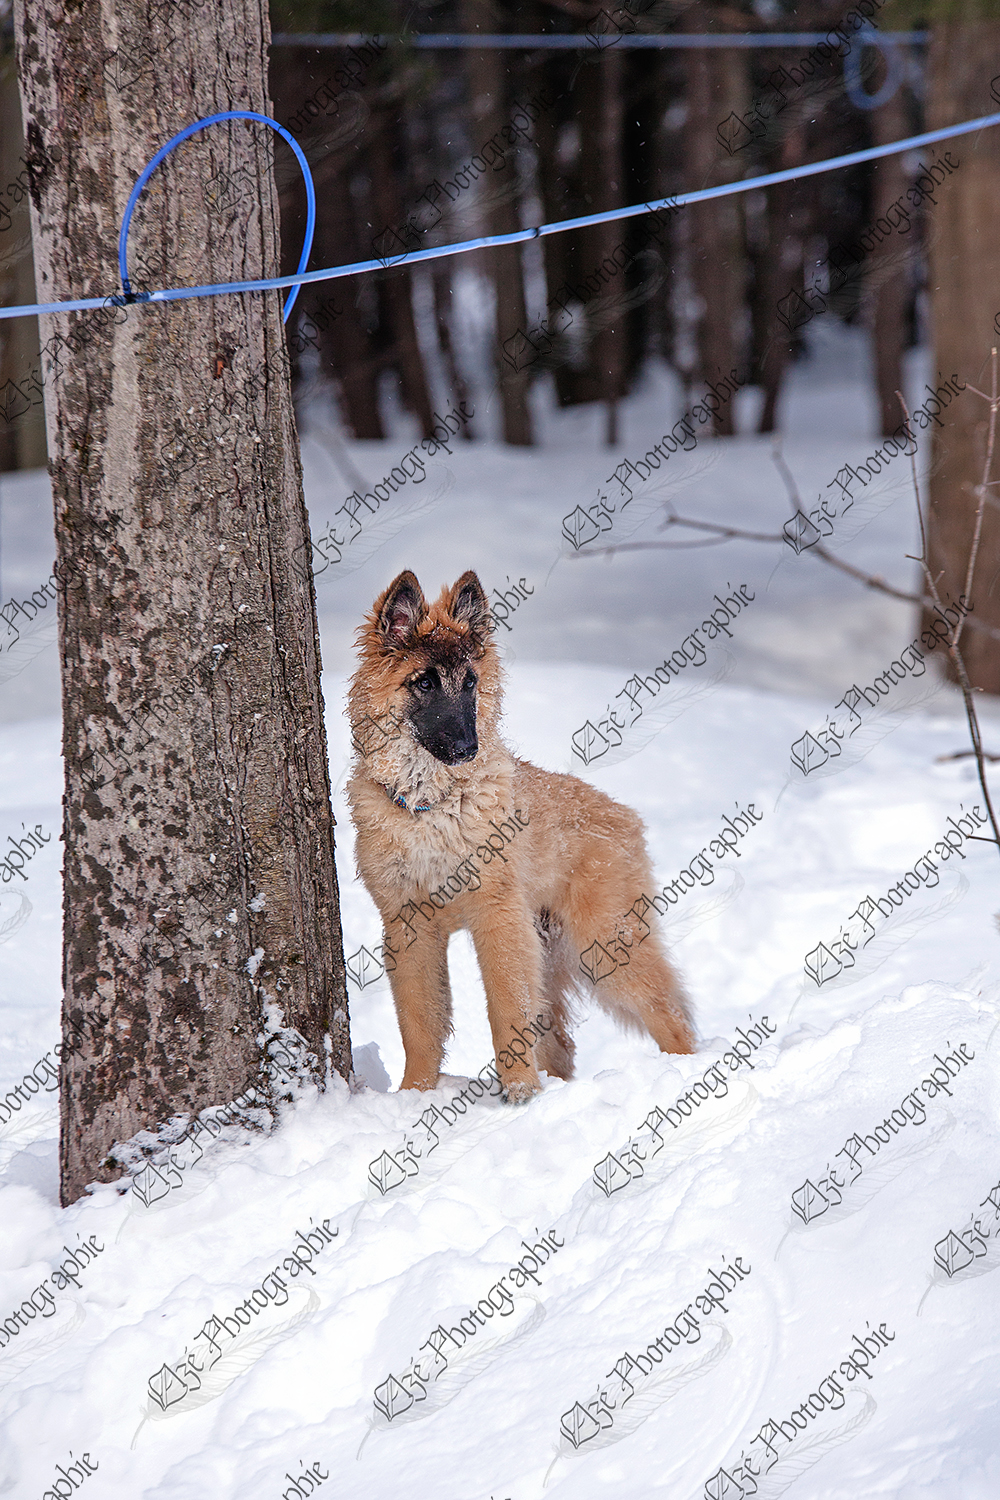 elze_photo_6037_chiot_race_pure_berger_puppy_maple_forest